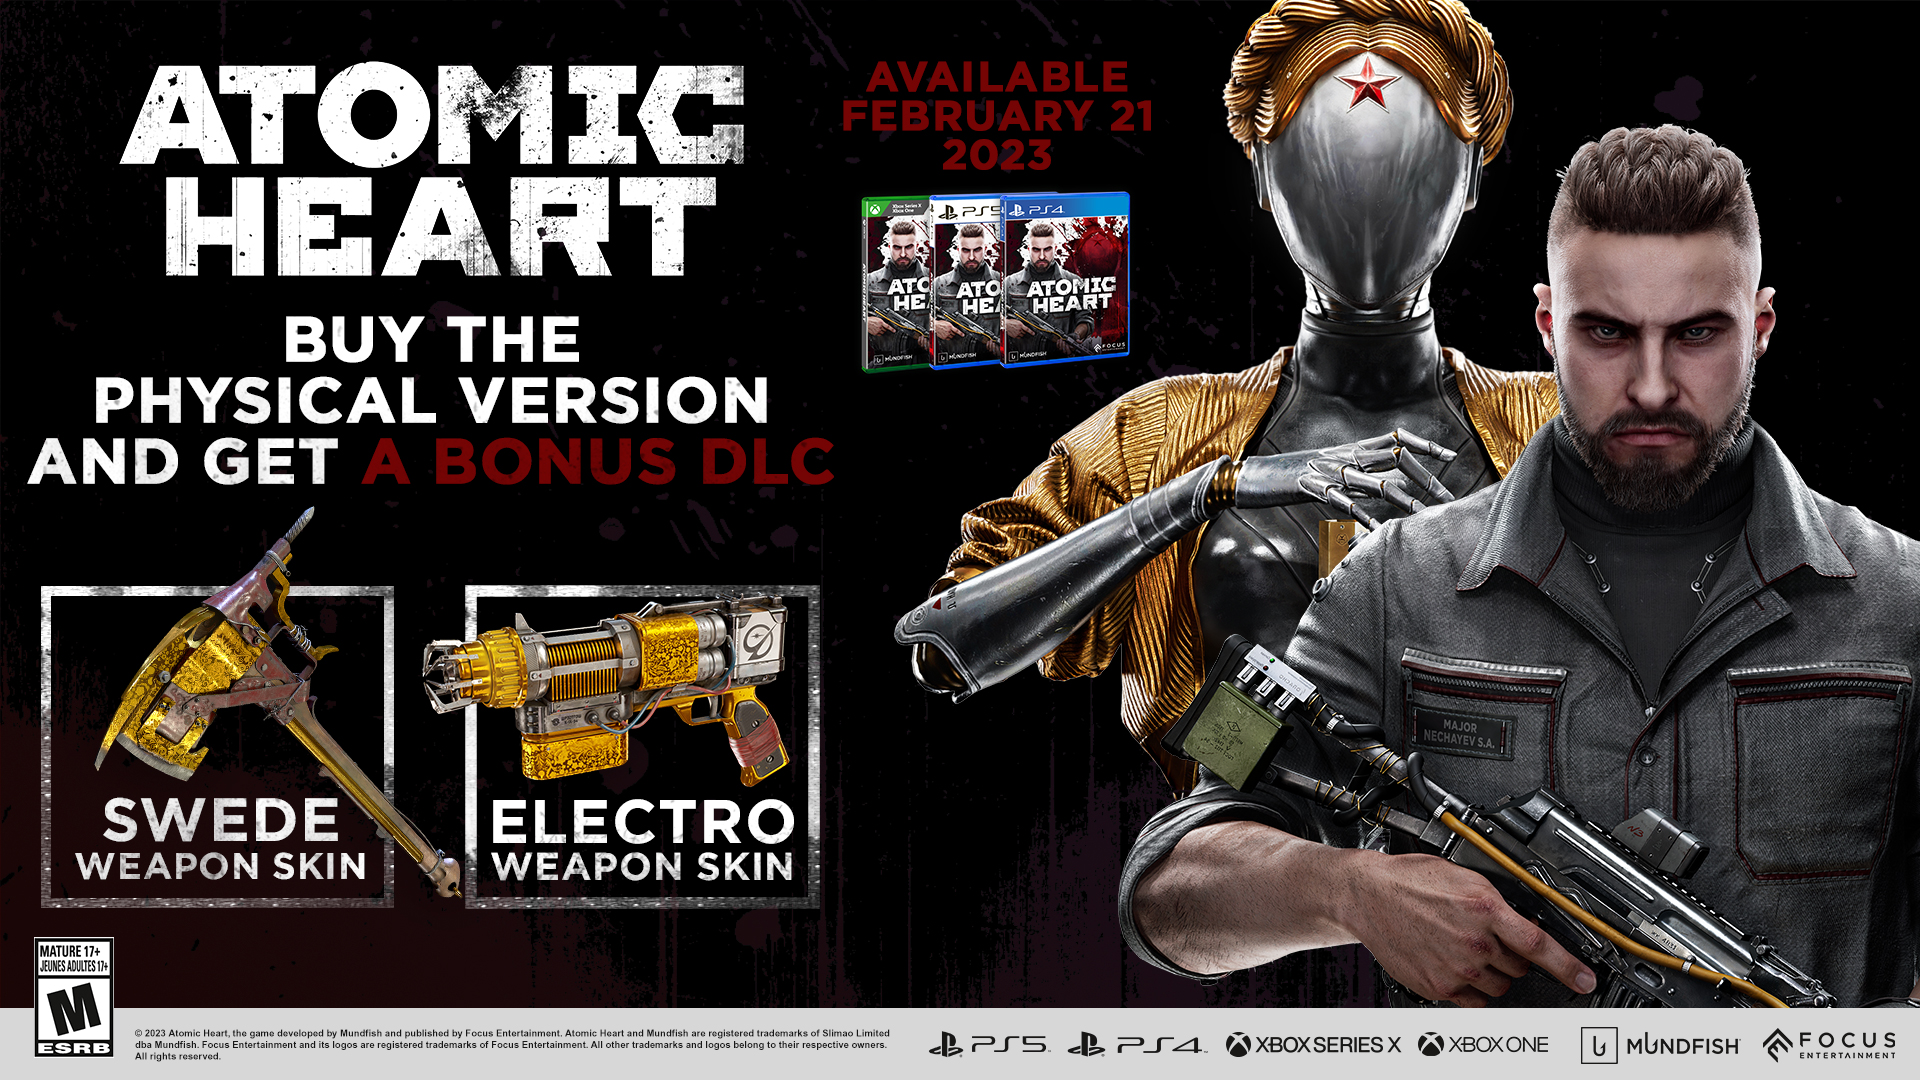 Are There DLCs for Atomic Heart?